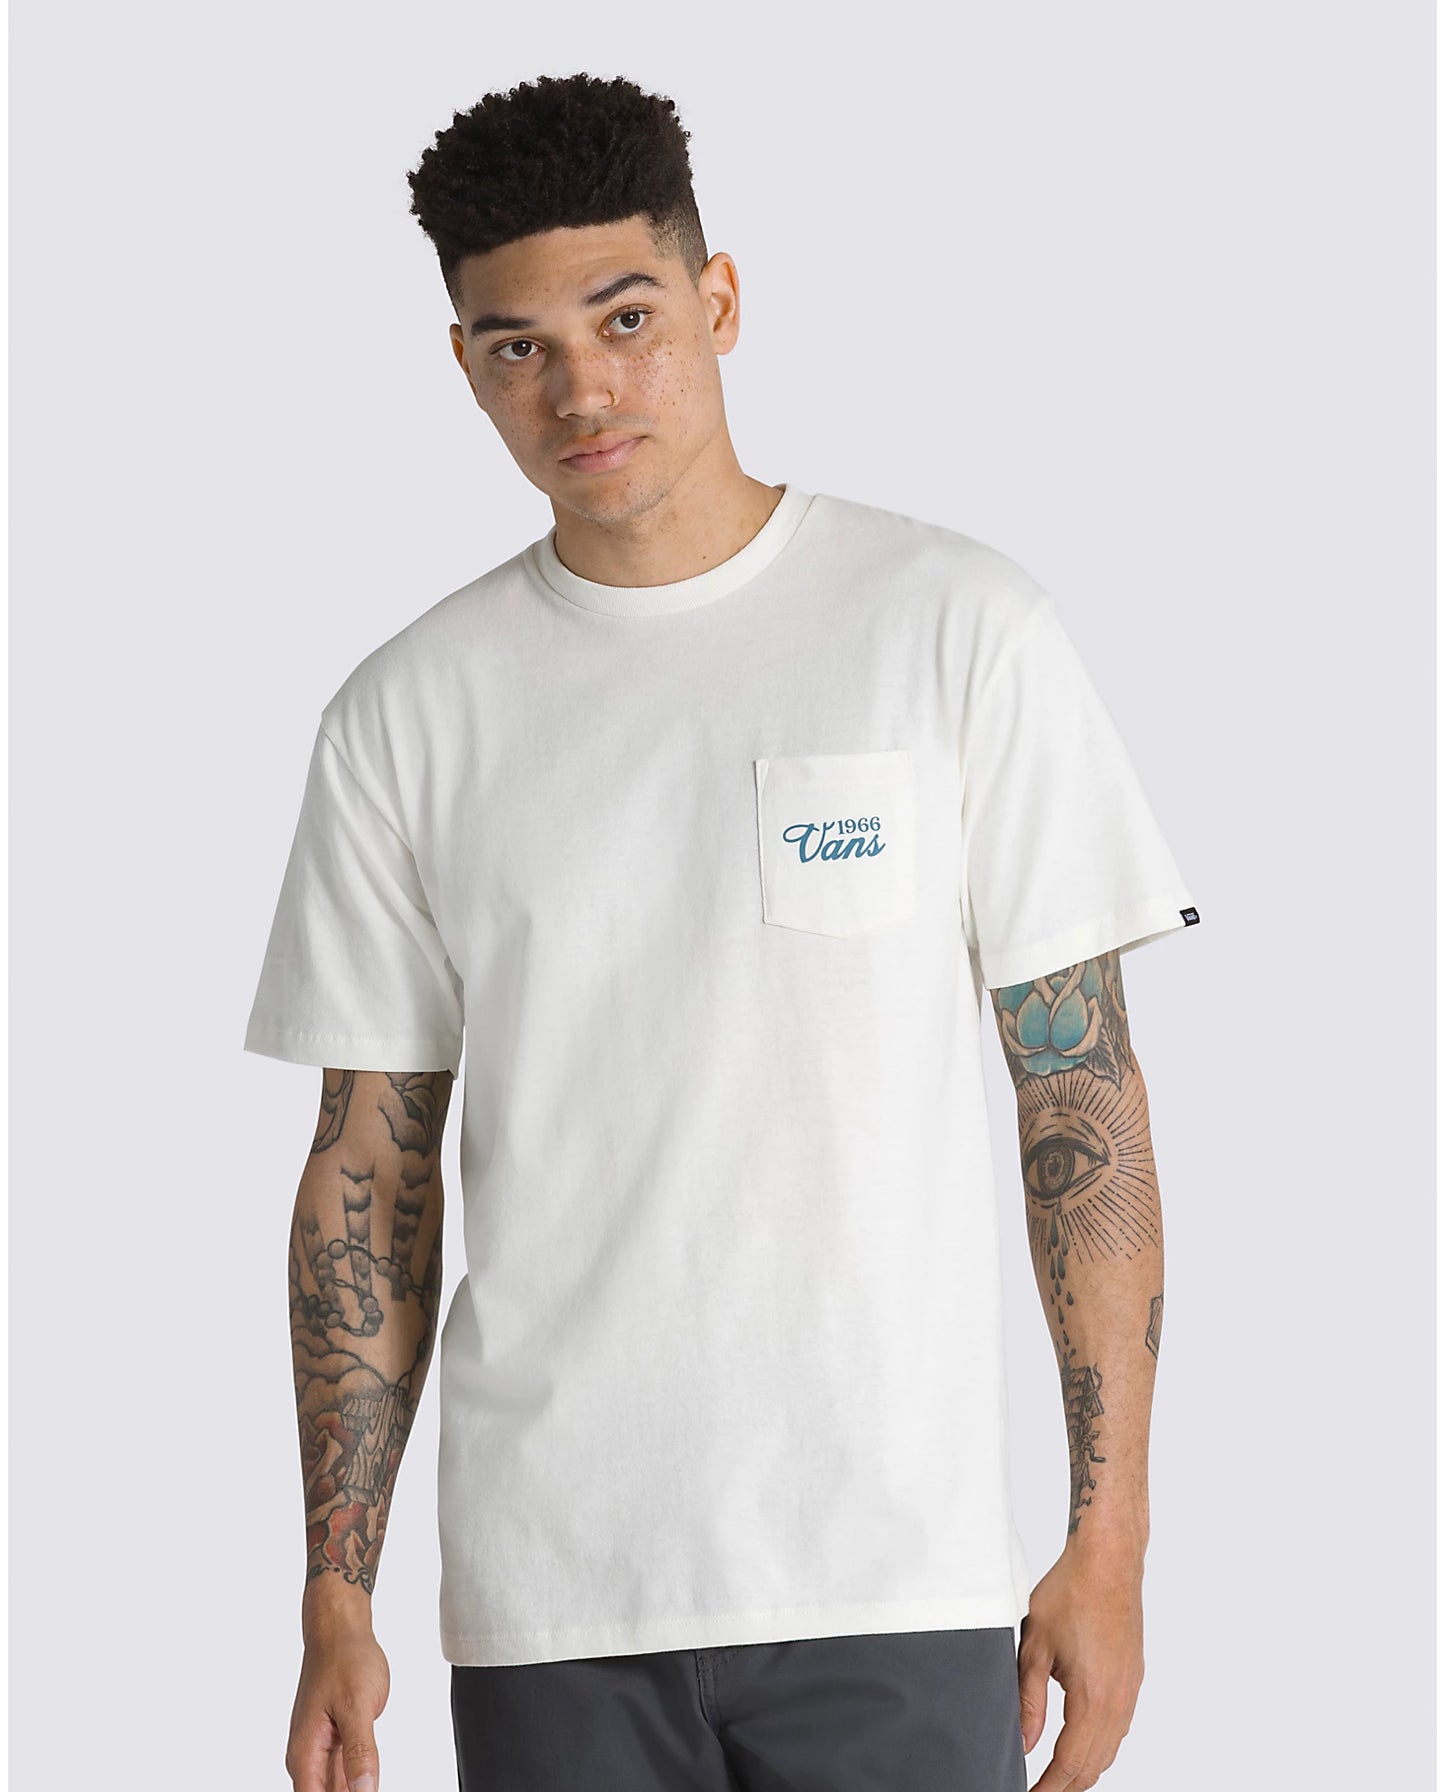 Keep Em Rollin s/s Tee Shirt Marshmallow(size options listed)